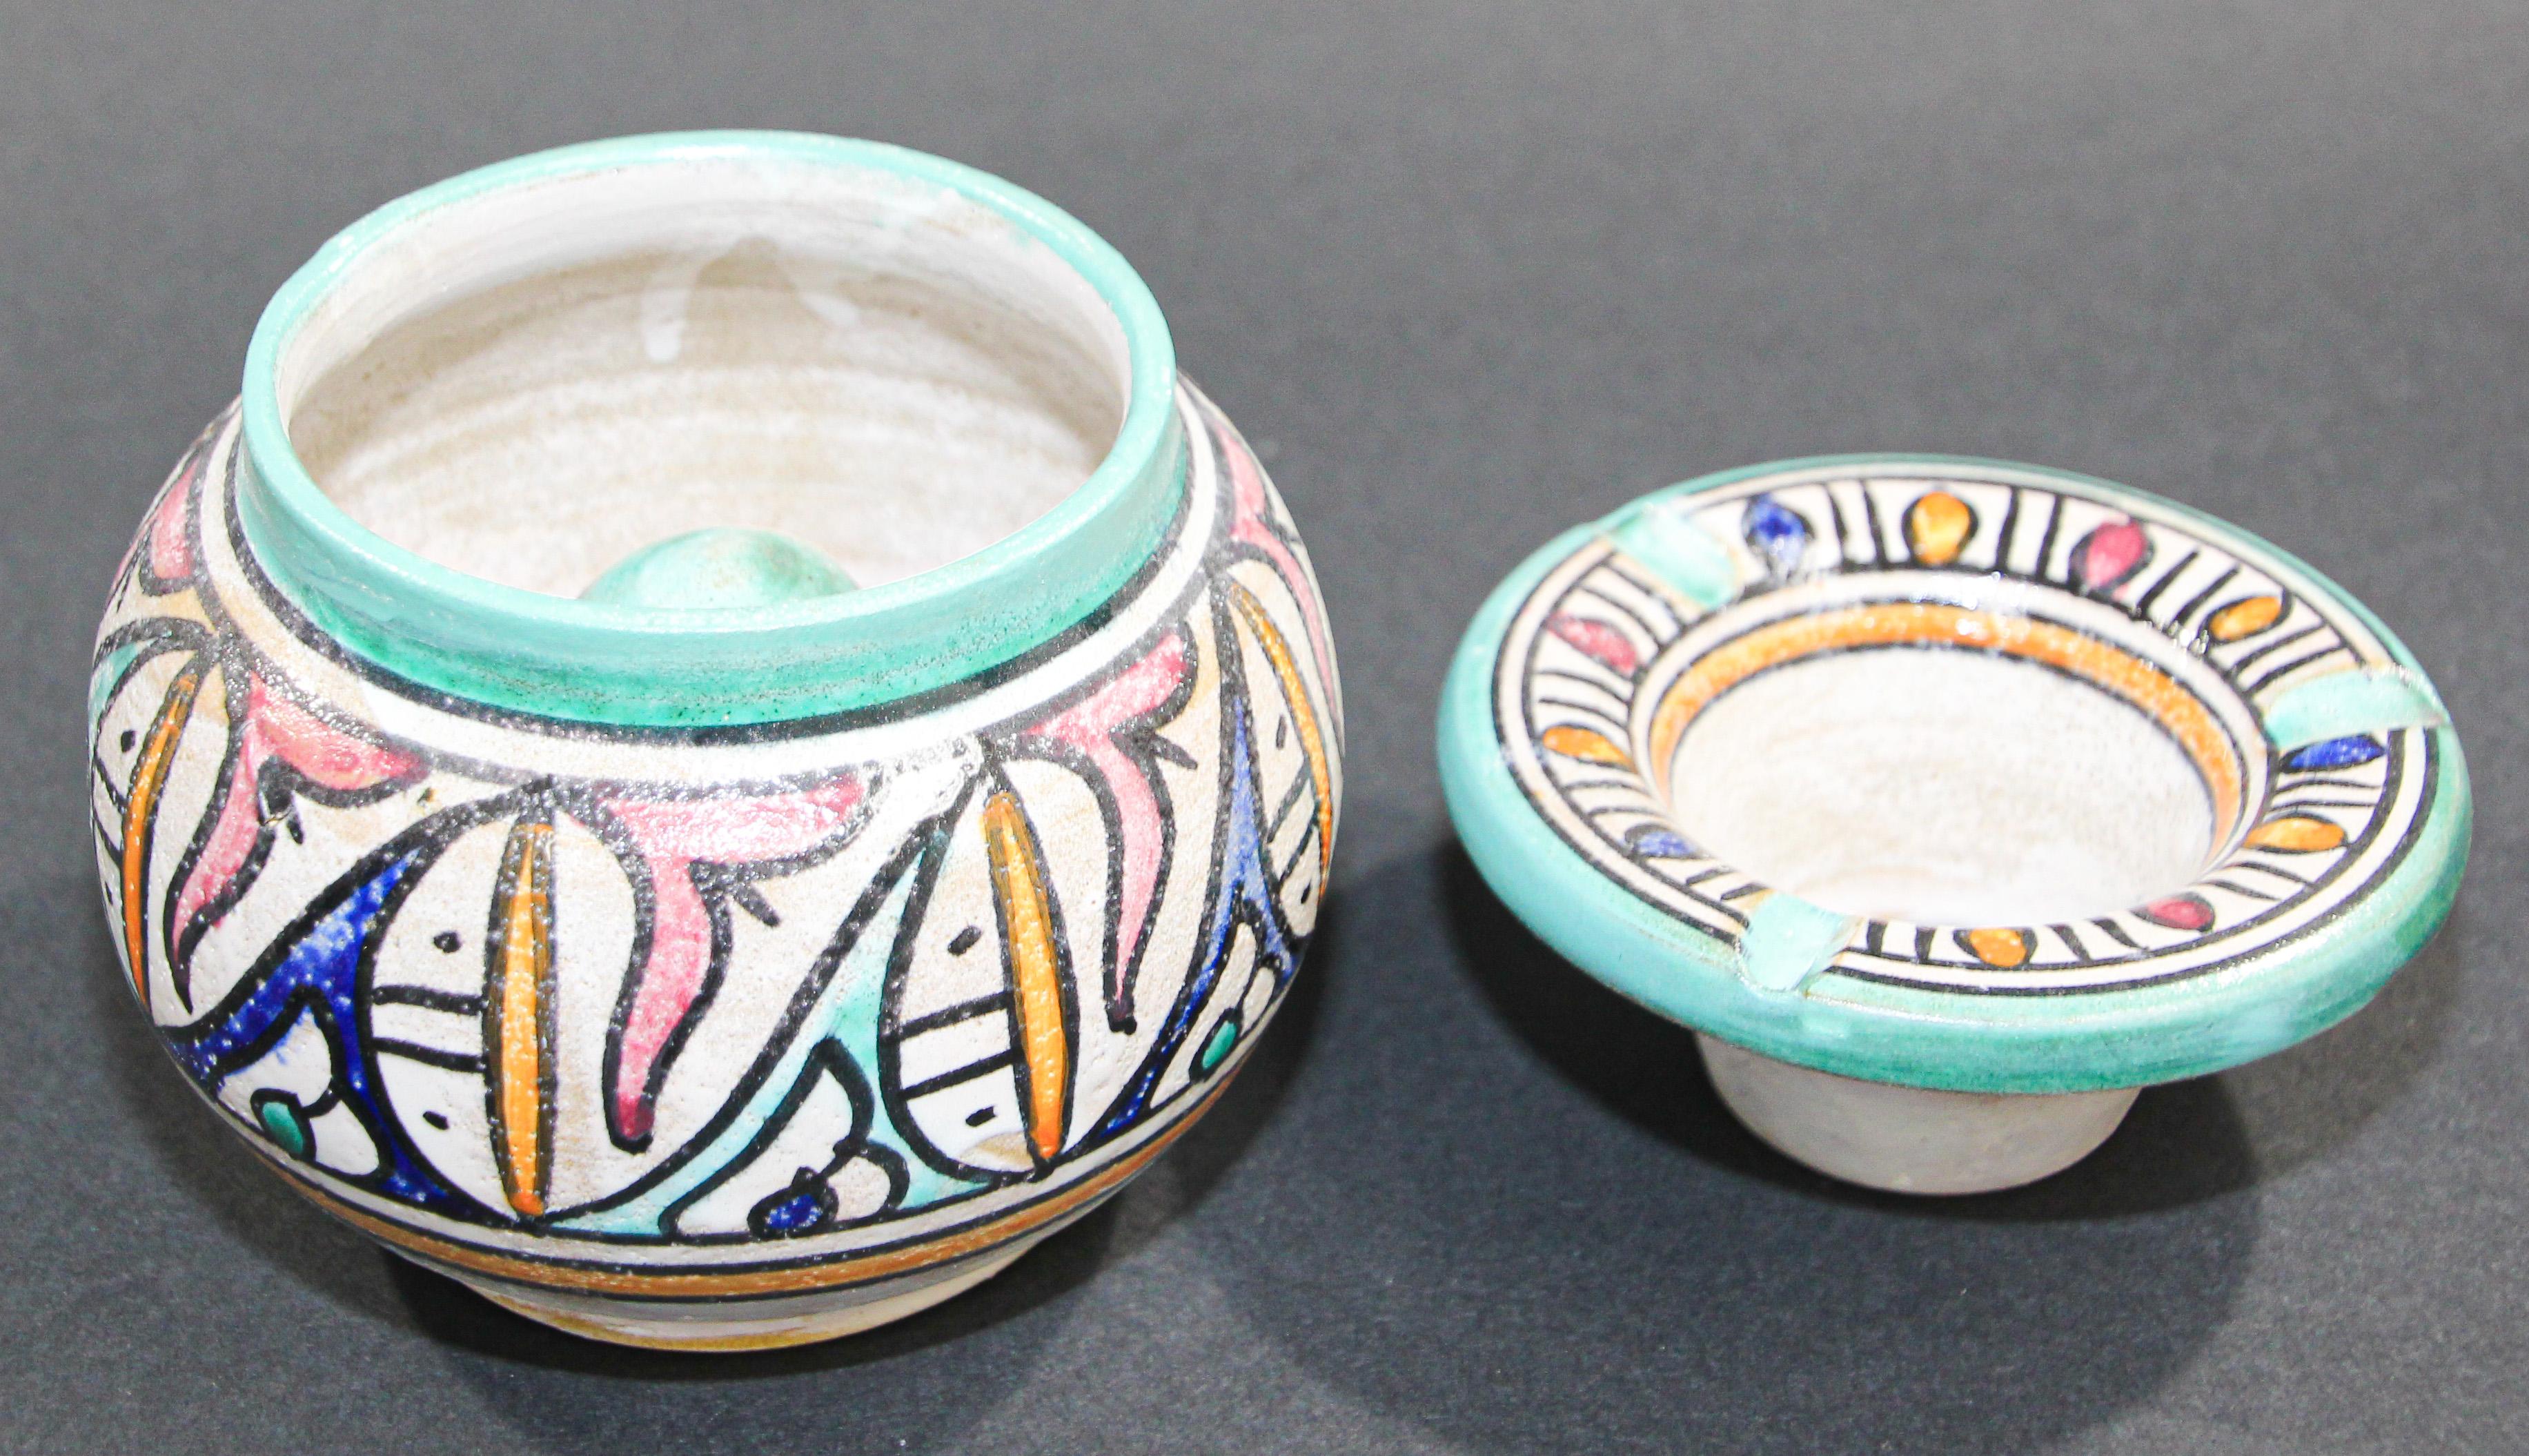 Hand-Crafted Vintage Ceramic Ashtray from Fez Morocco